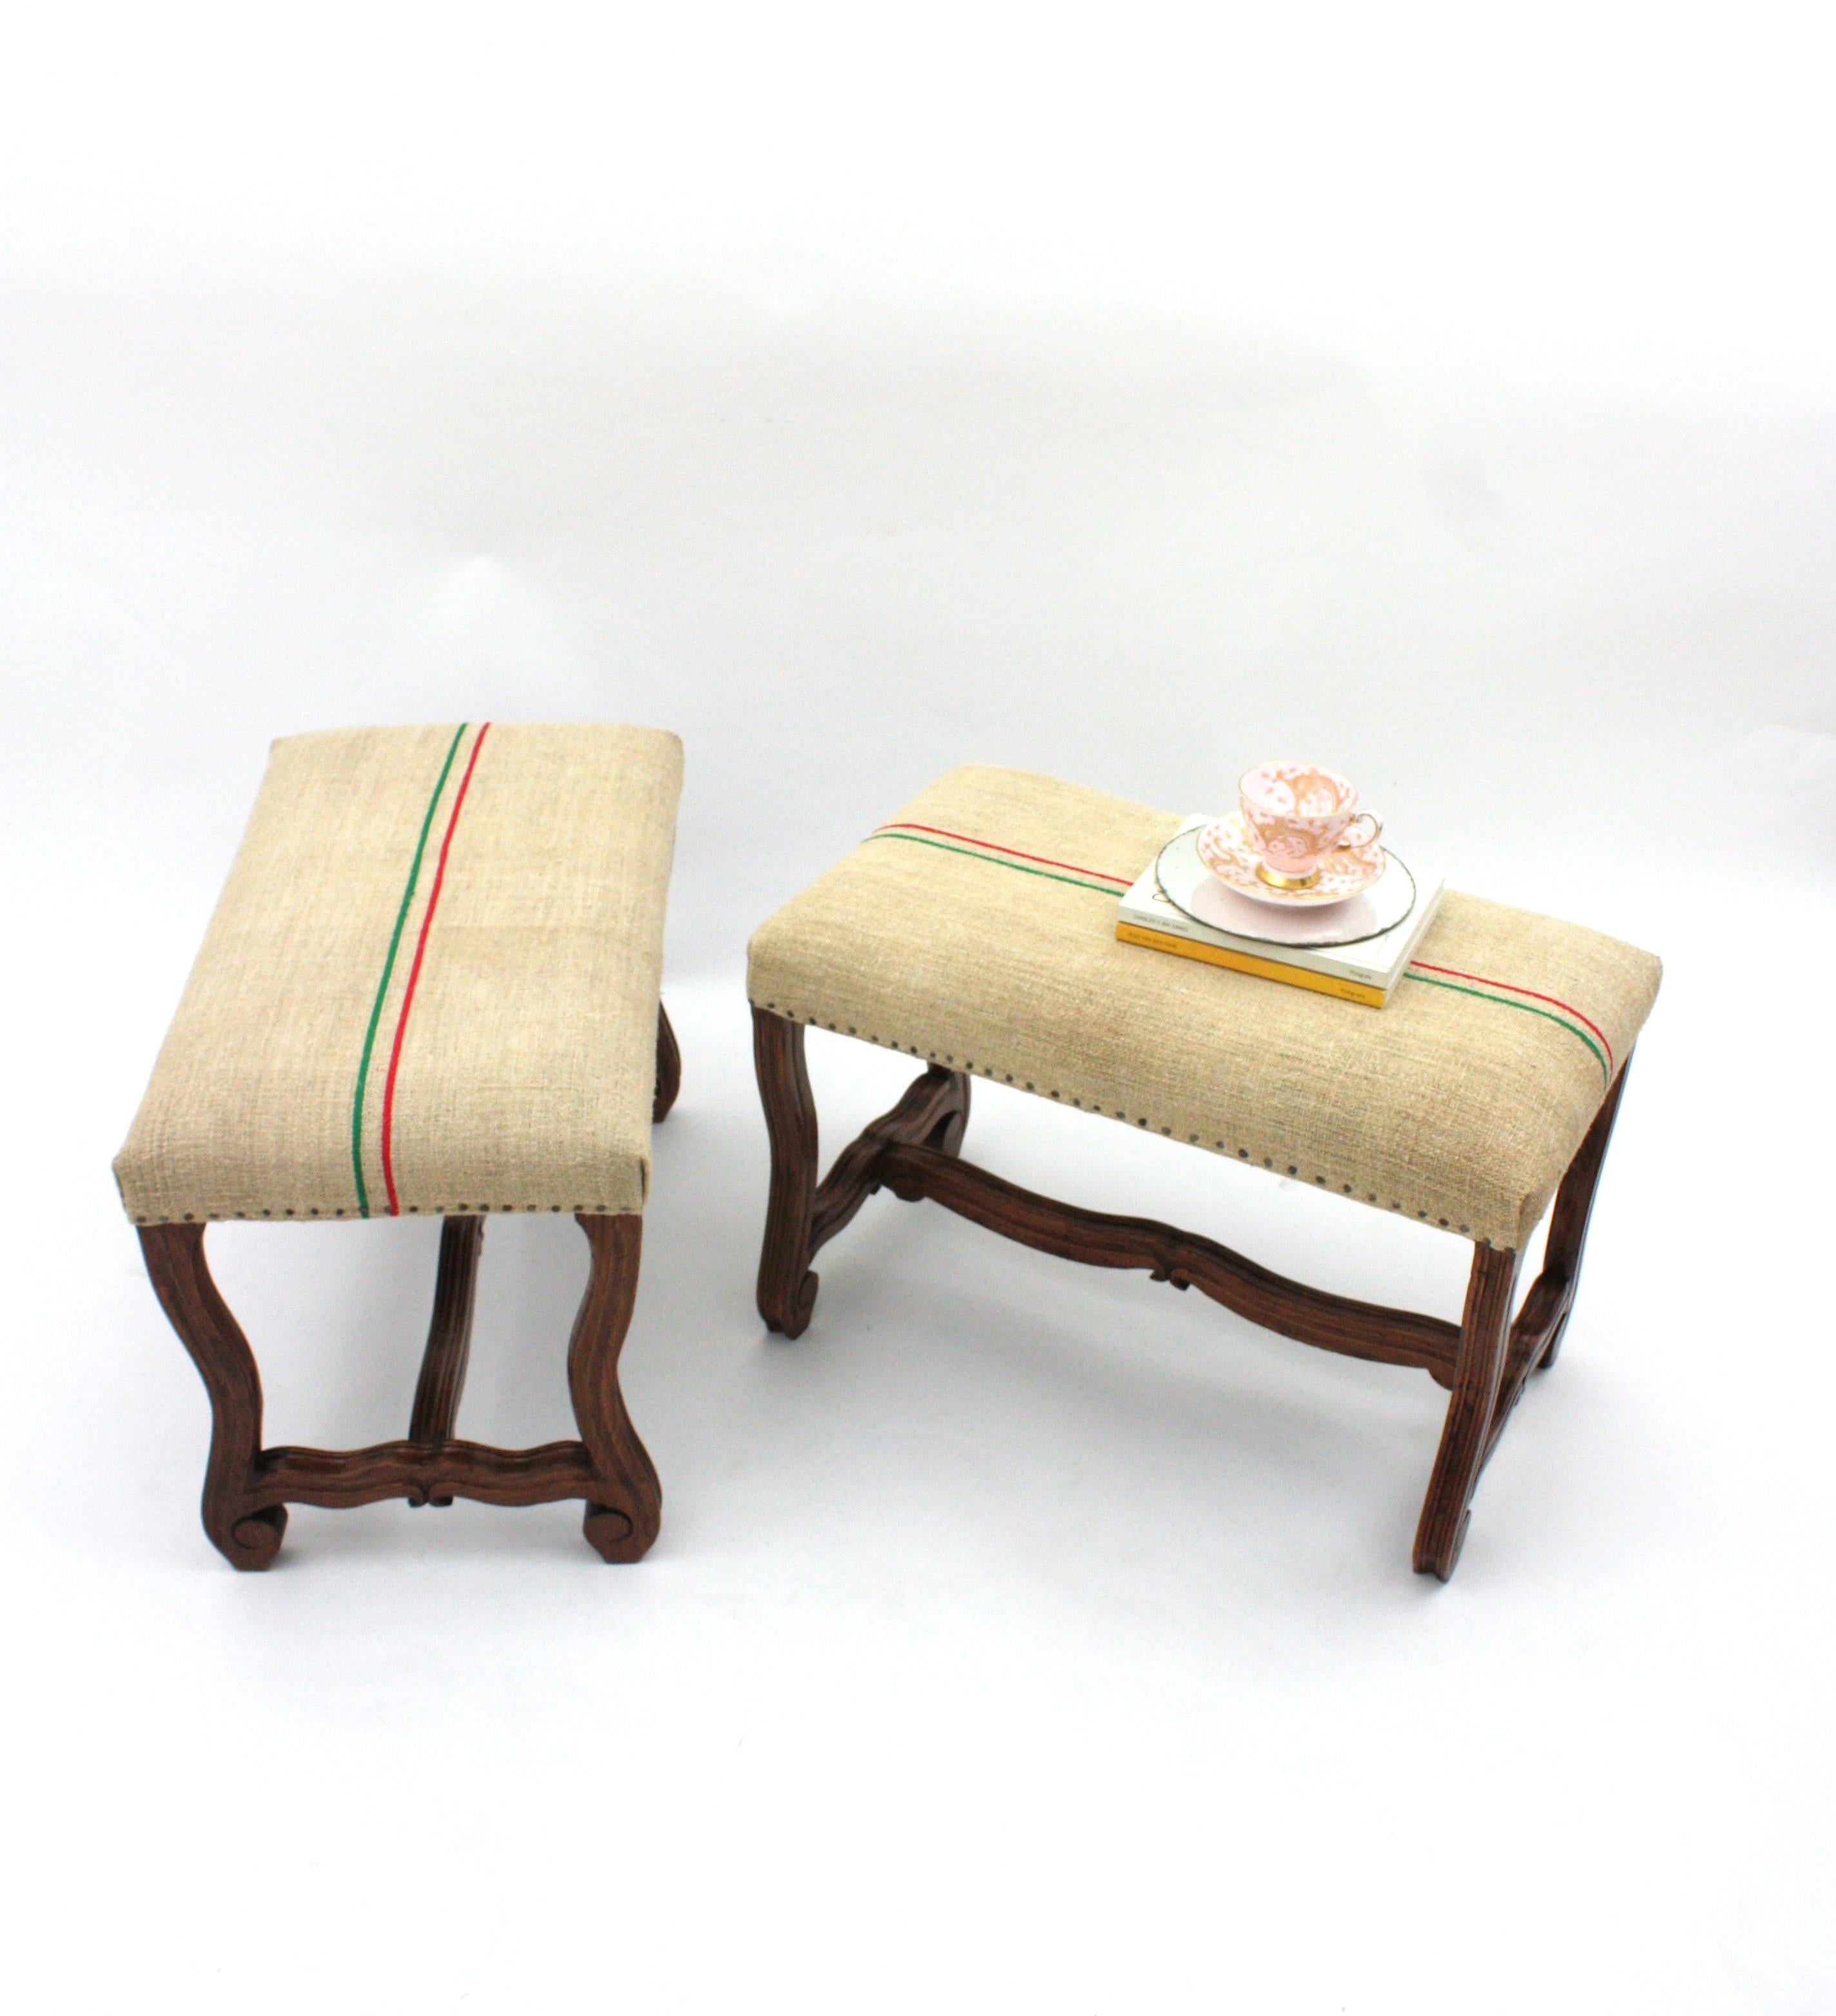 Pair of Os de Mouton Louis XIV Oak Stools New Upholstered in French Linen  For Sale 6